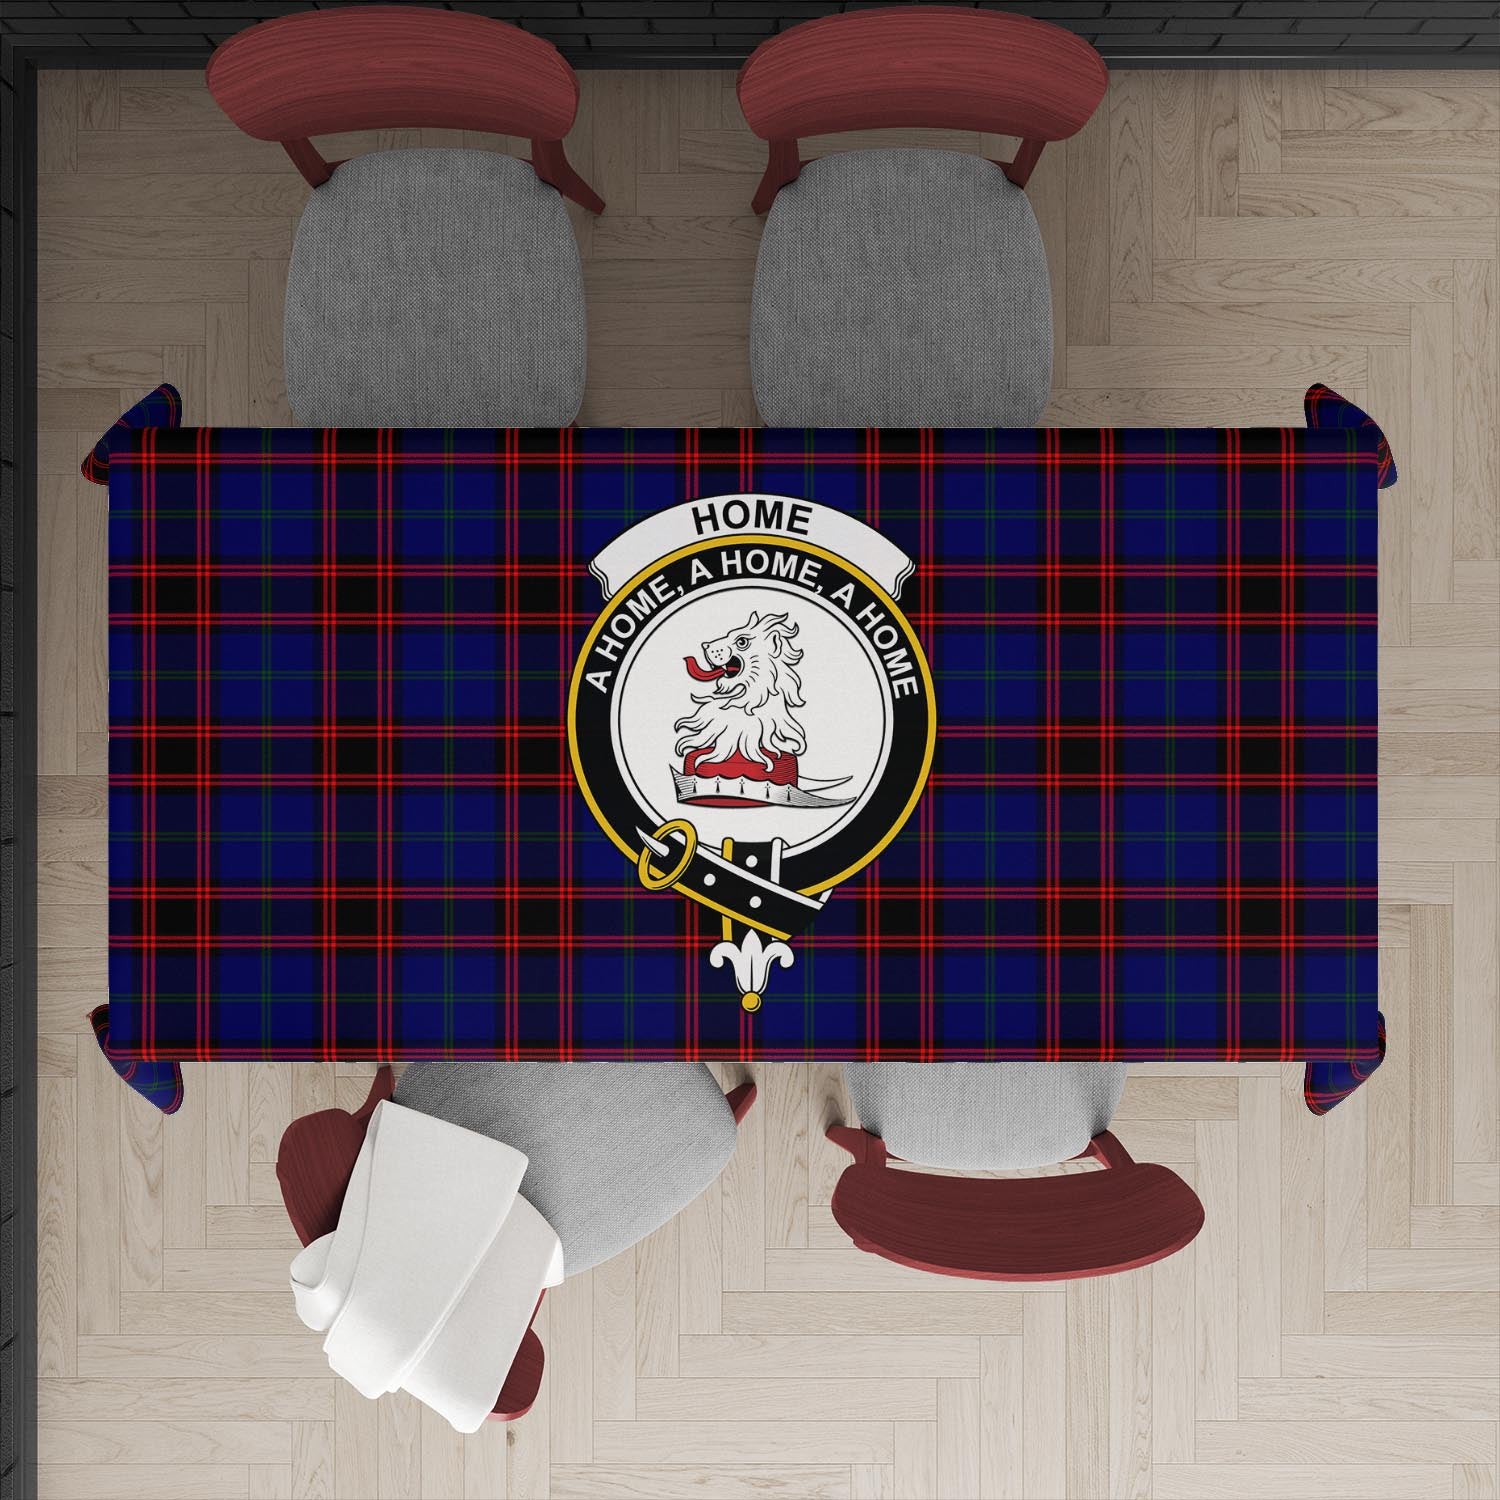 home-modern-tatan-tablecloth-with-family-crest